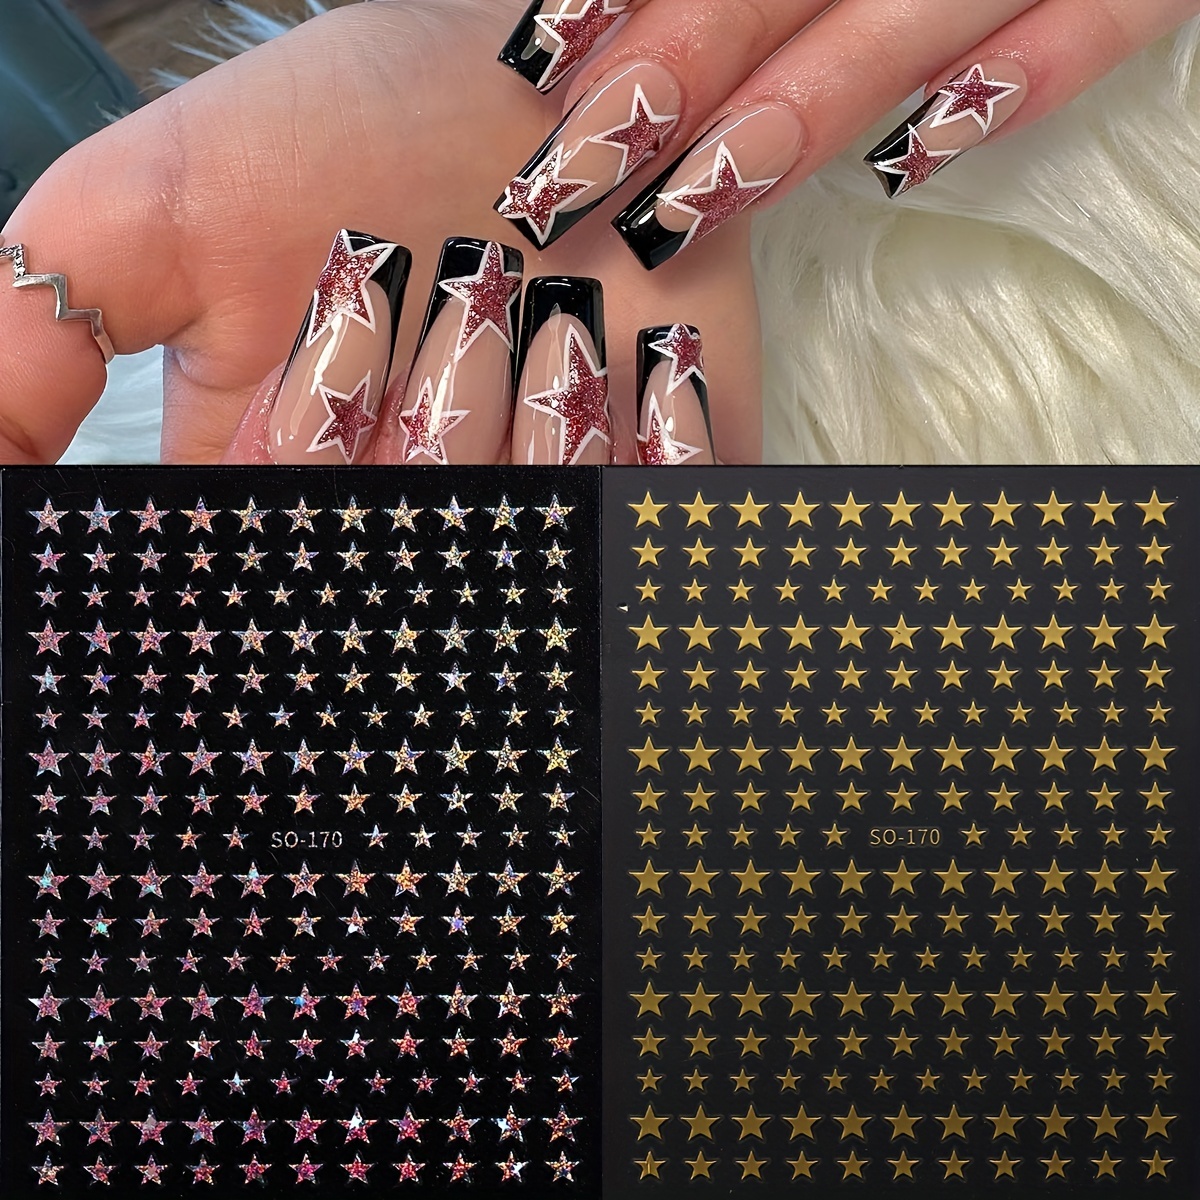 2pcs sparkling glitter star nail art stickers reflective flakes for glamorous manicures